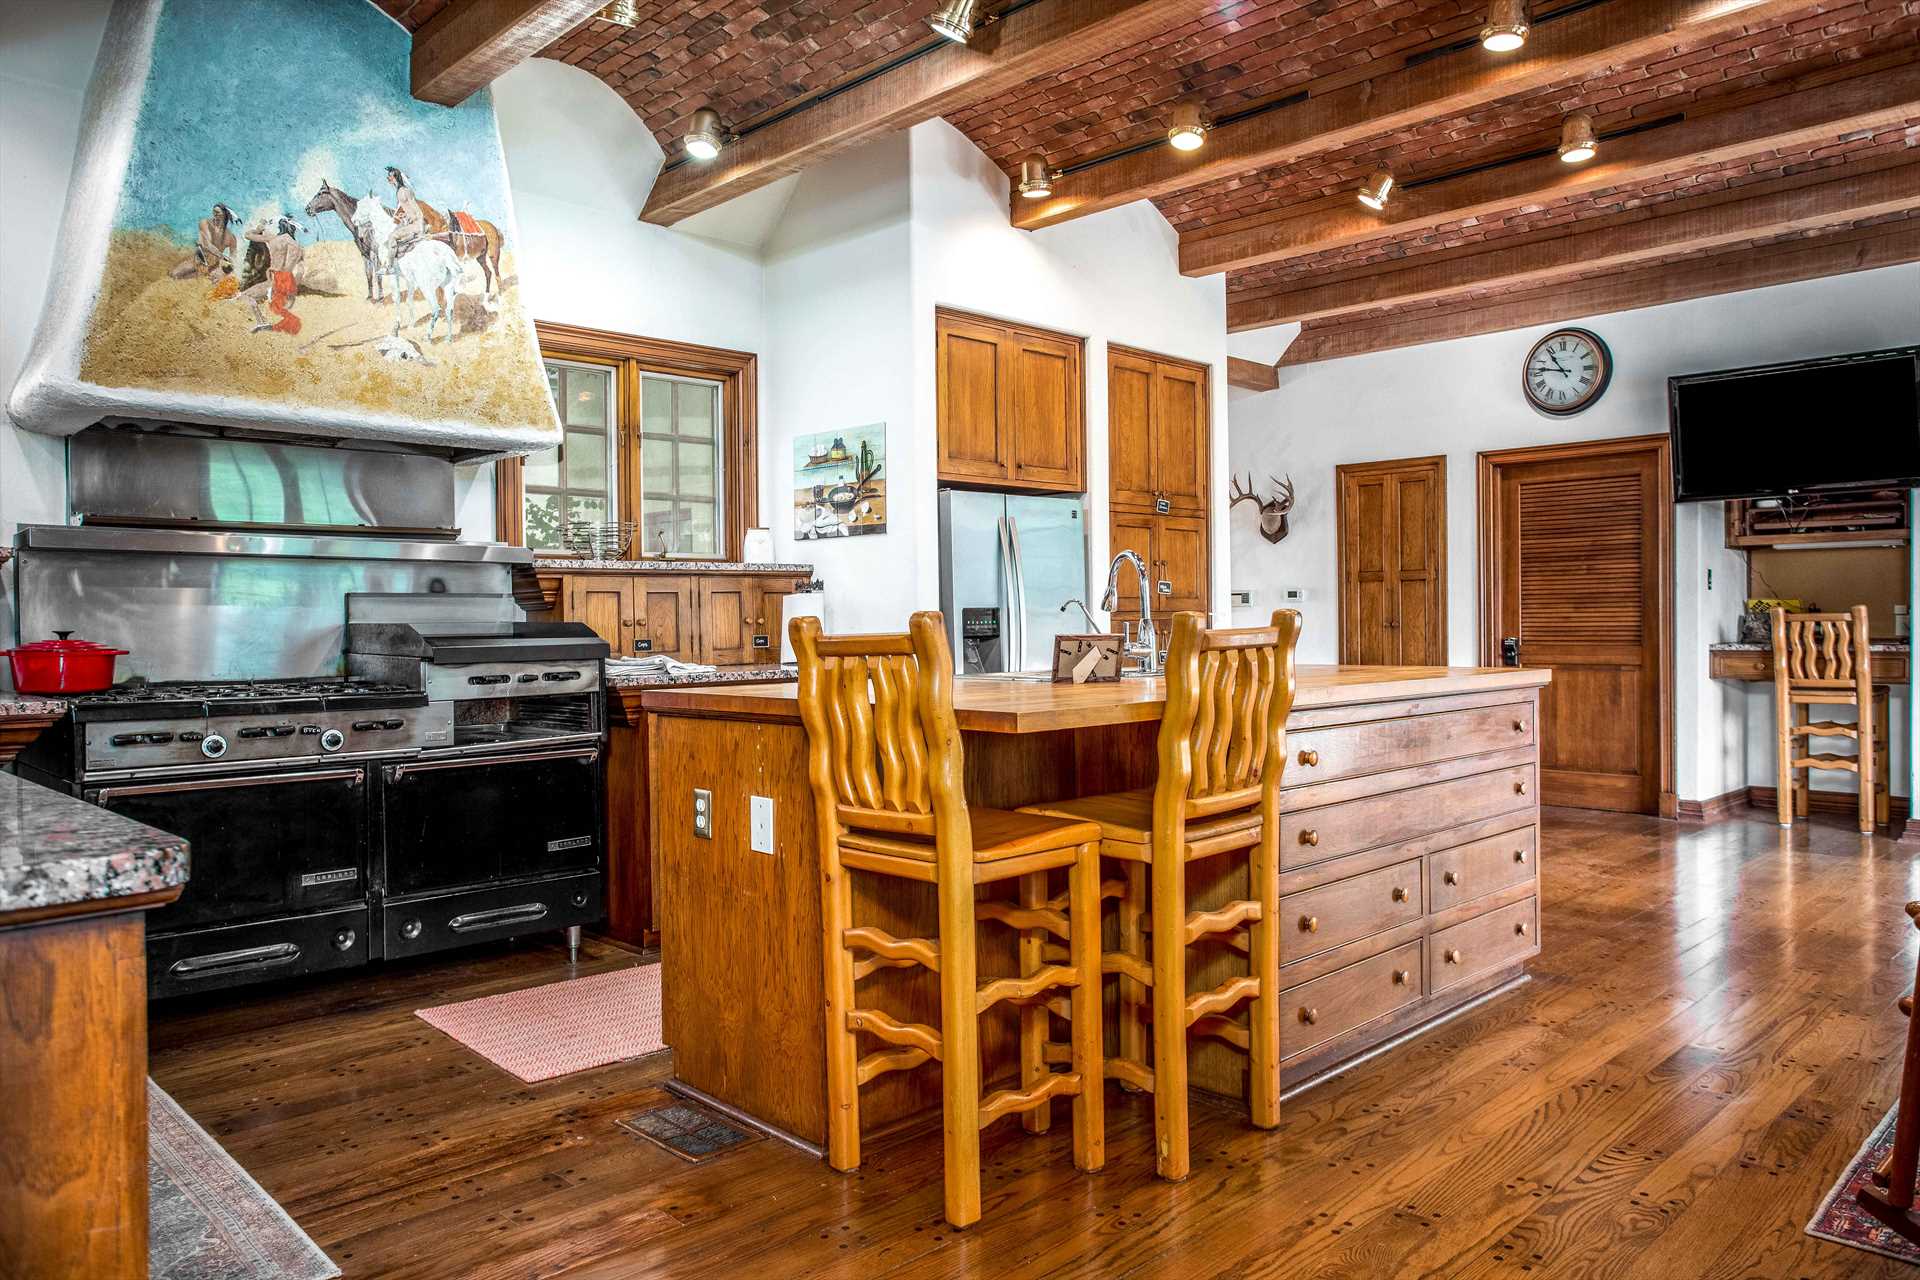                                                 The huge commercial-grade oven and range in the Homestead's kitchen is colorfully capped by a beautiful western mural.